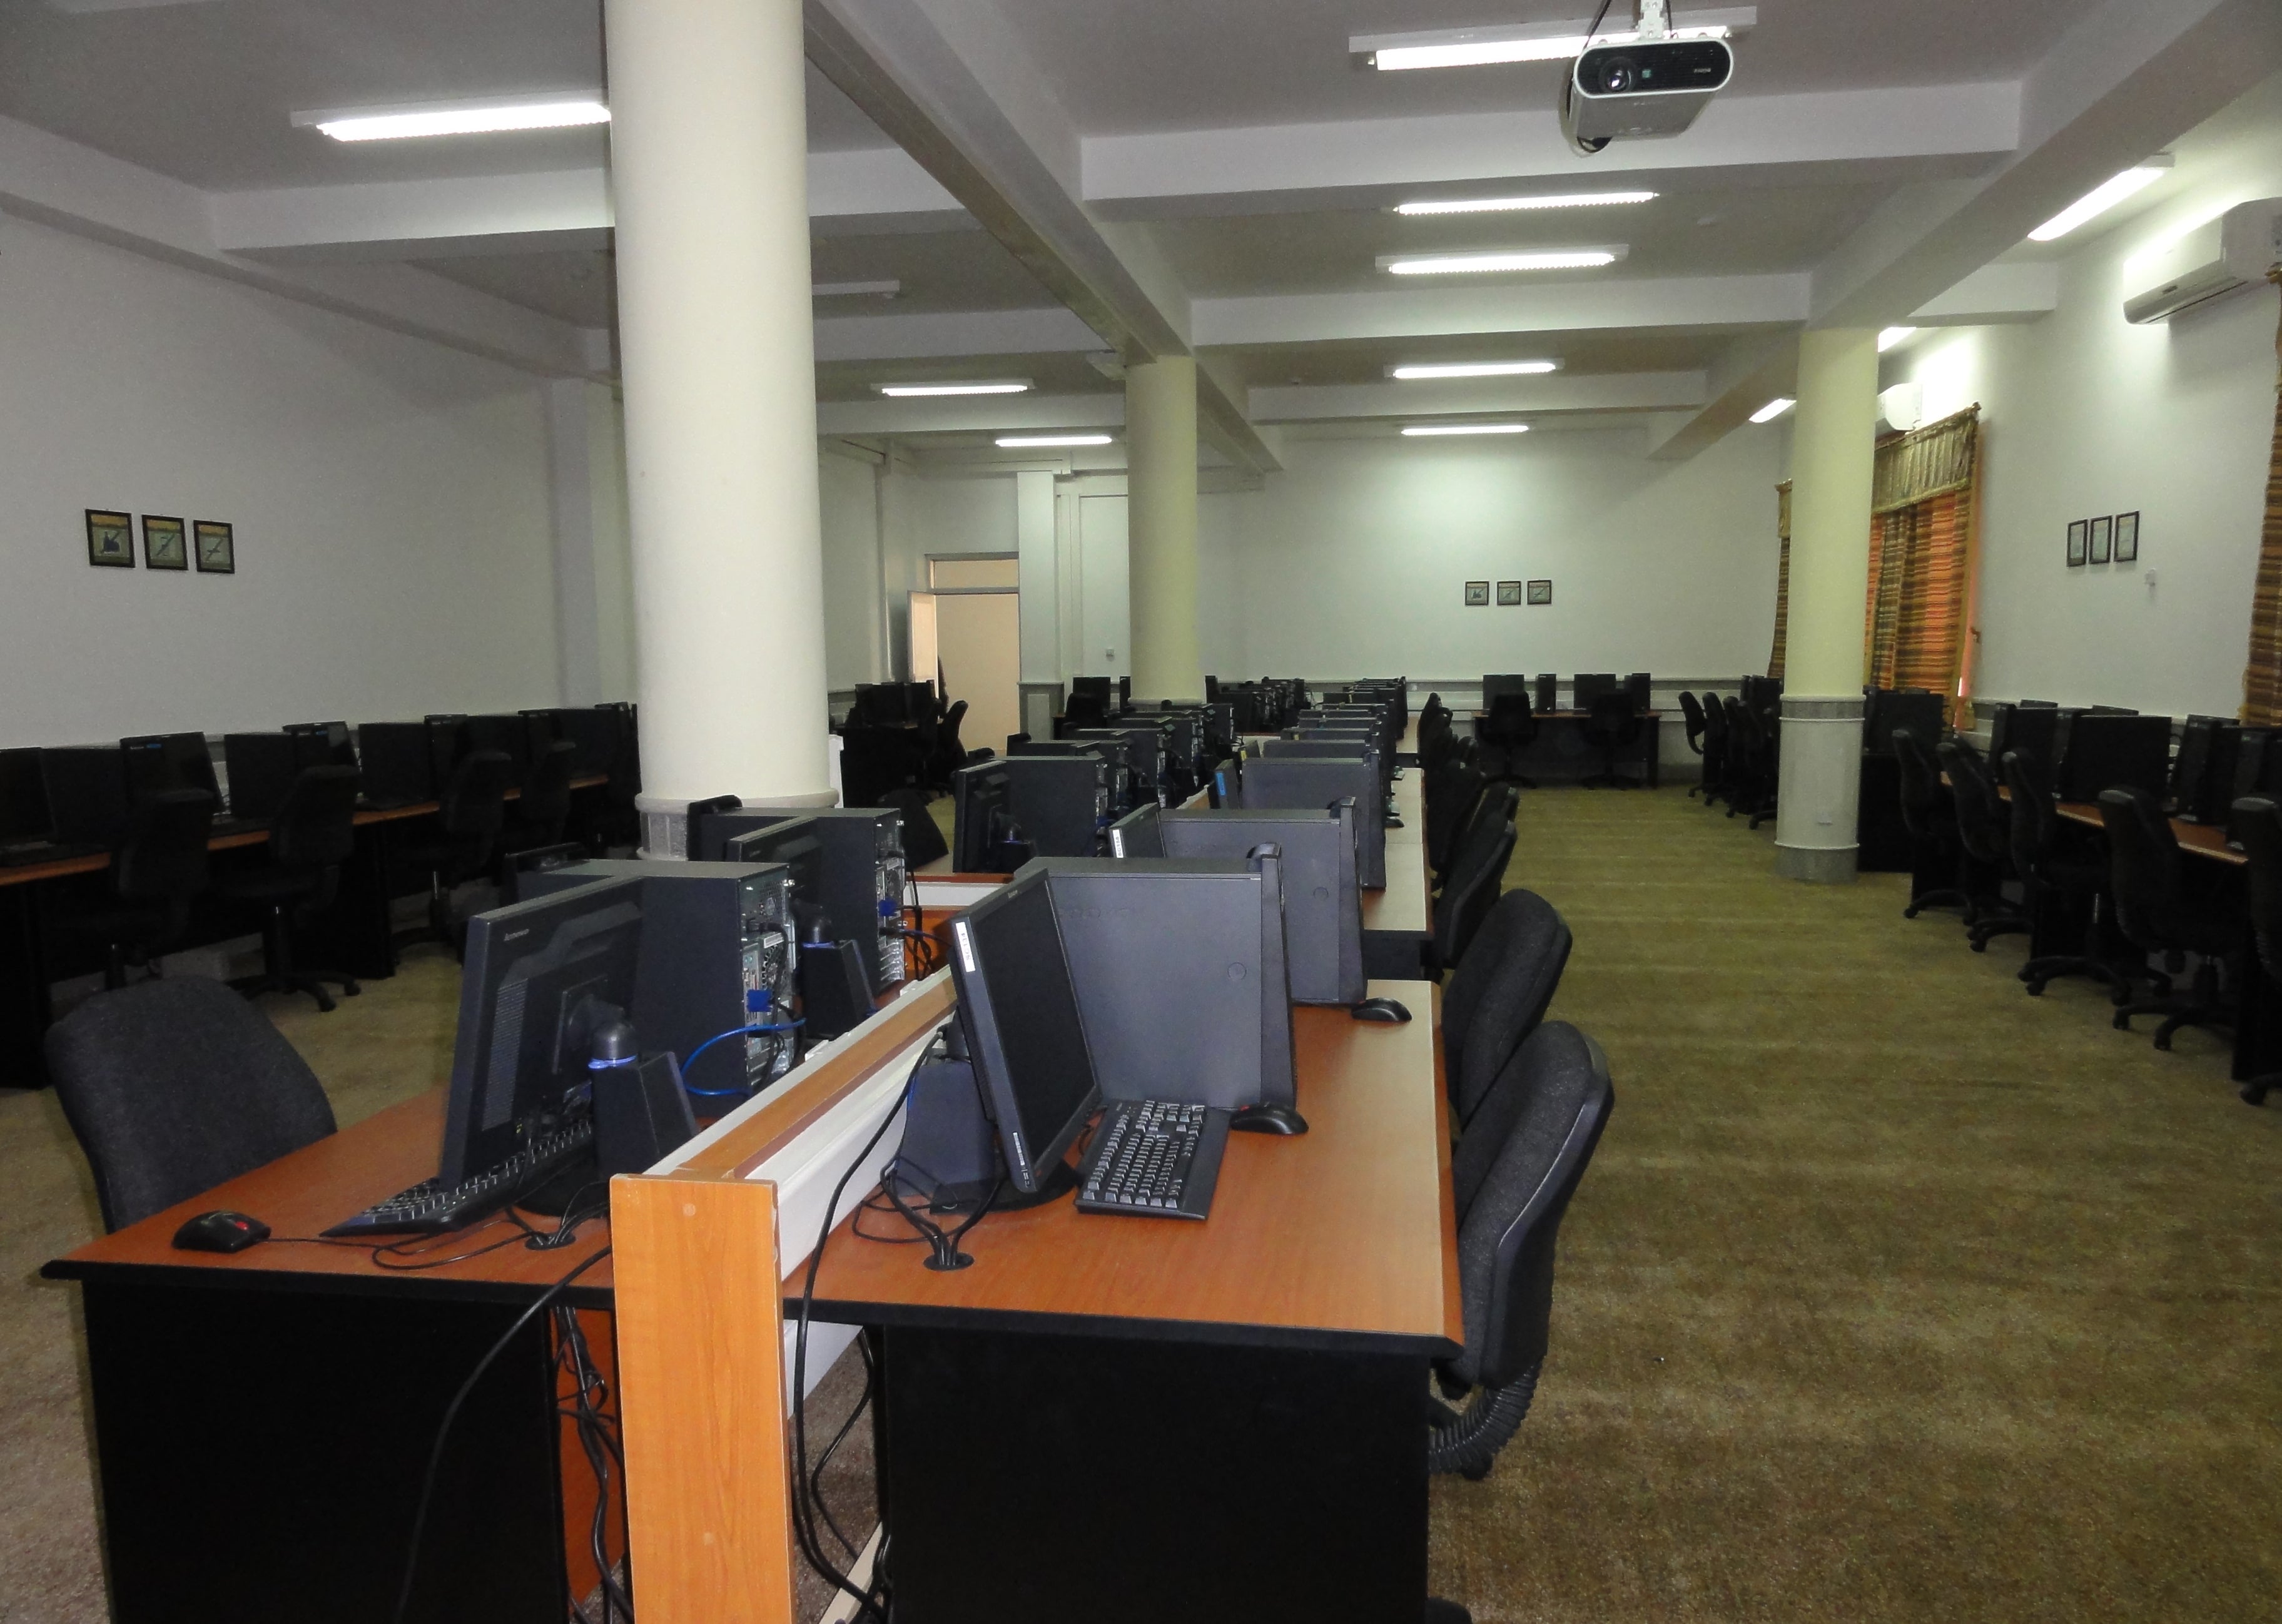 View of the new IT center at the University of Herat